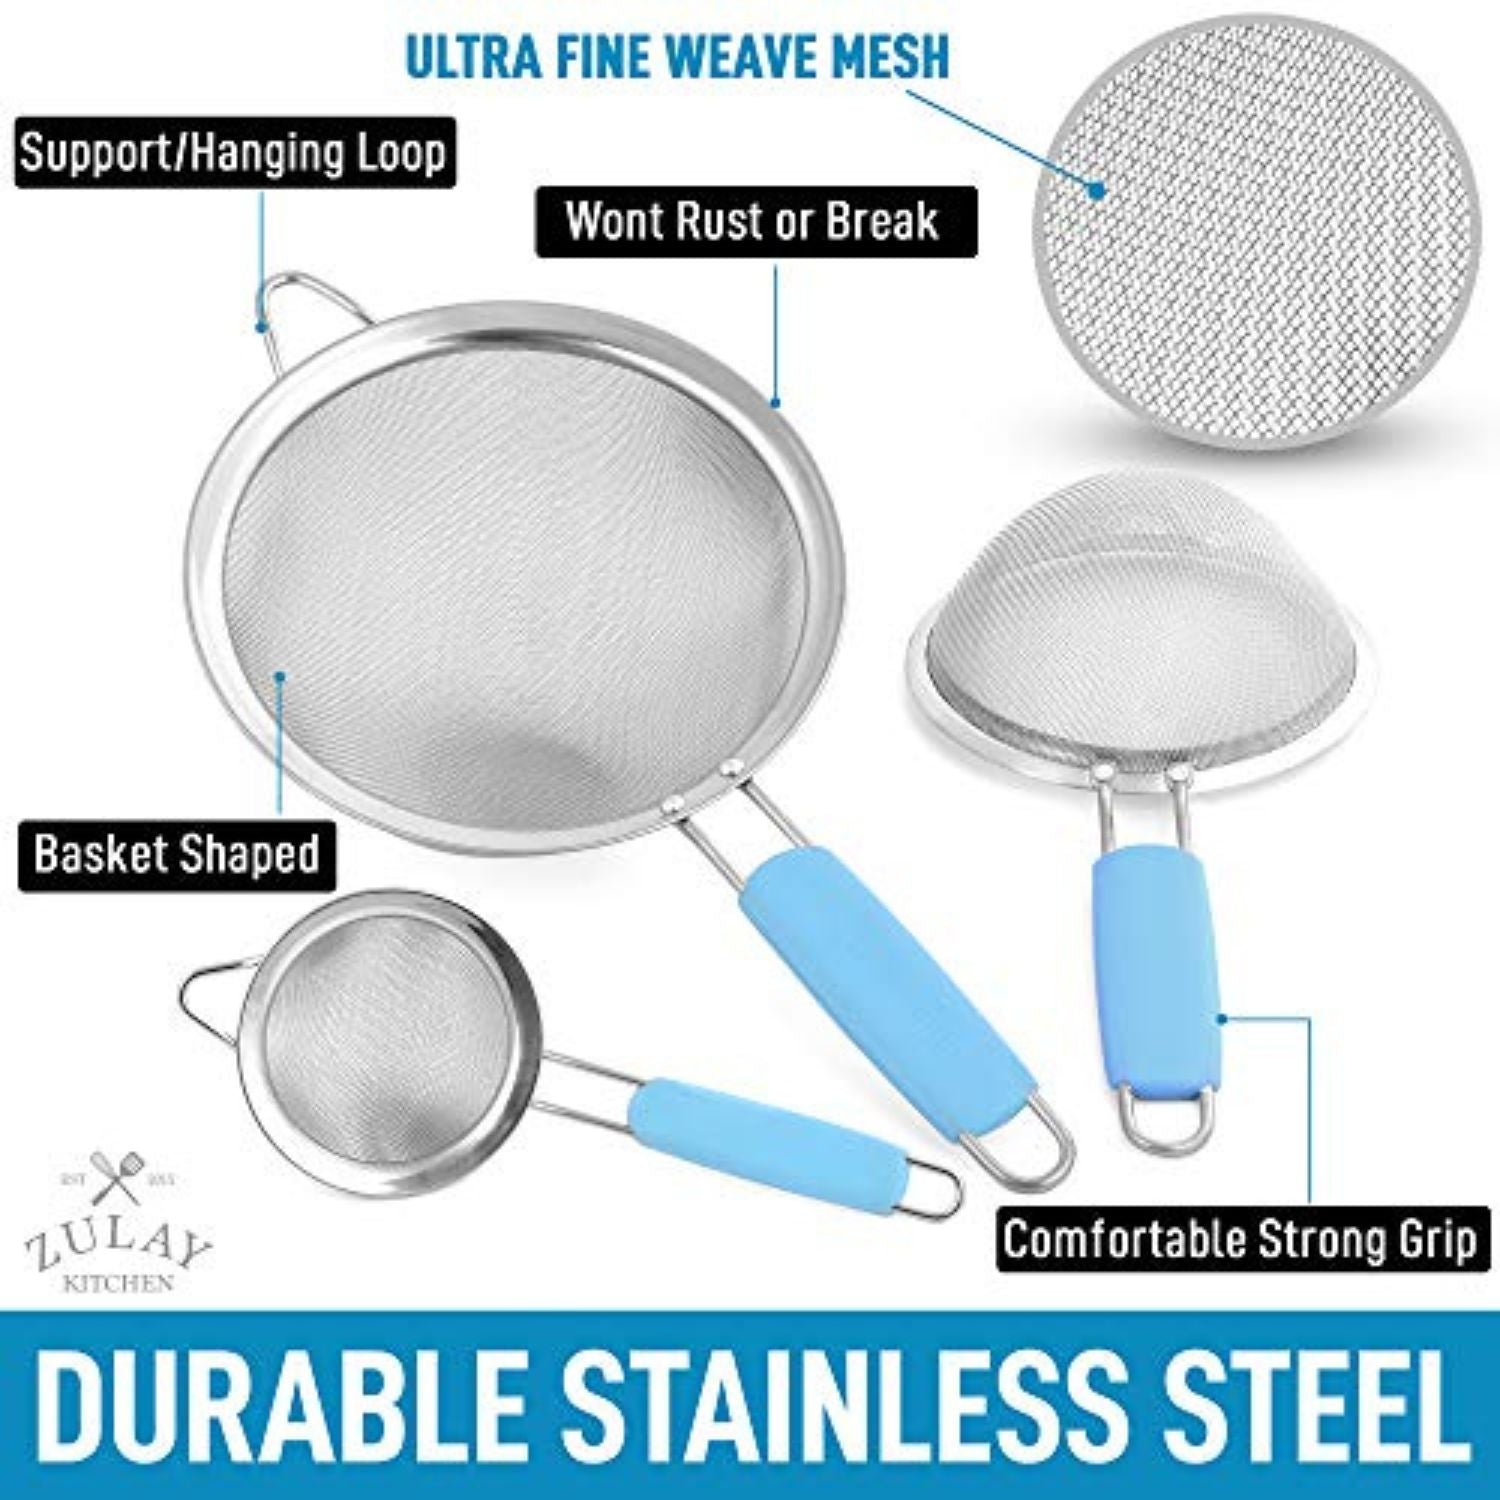 Kitchen strainer made with durable stainless steel